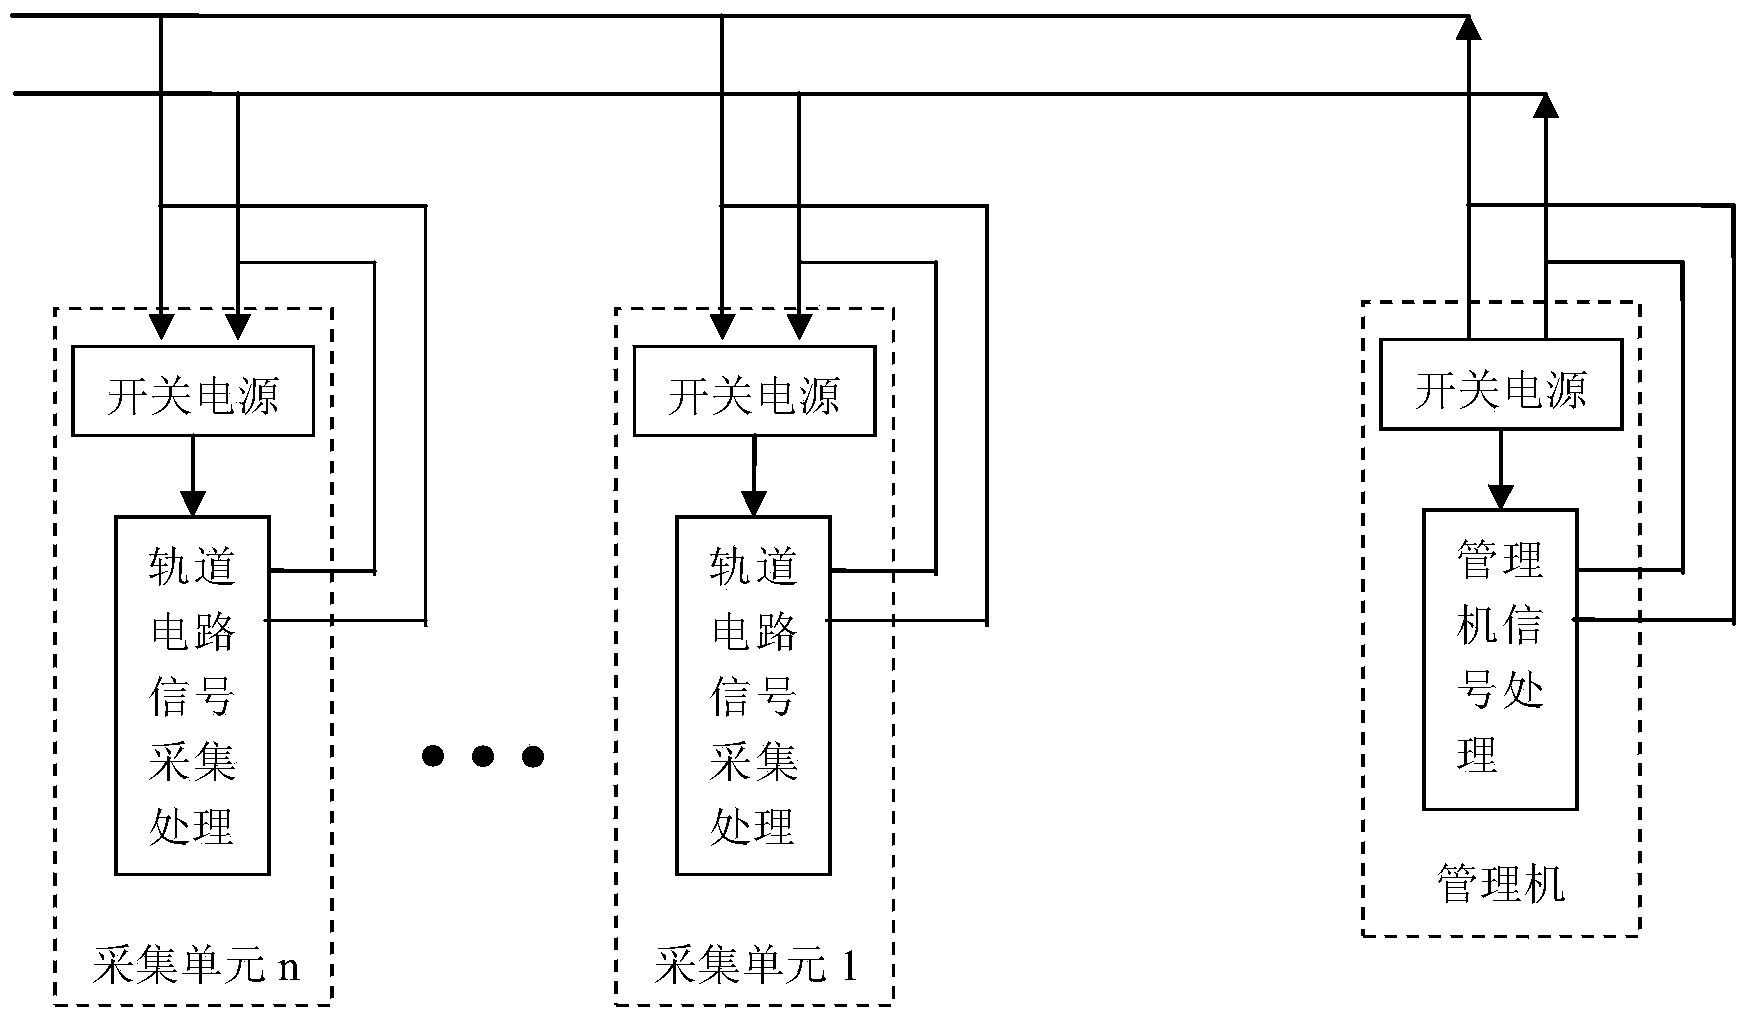 Outdoor track circuit integrated monitoring system and method